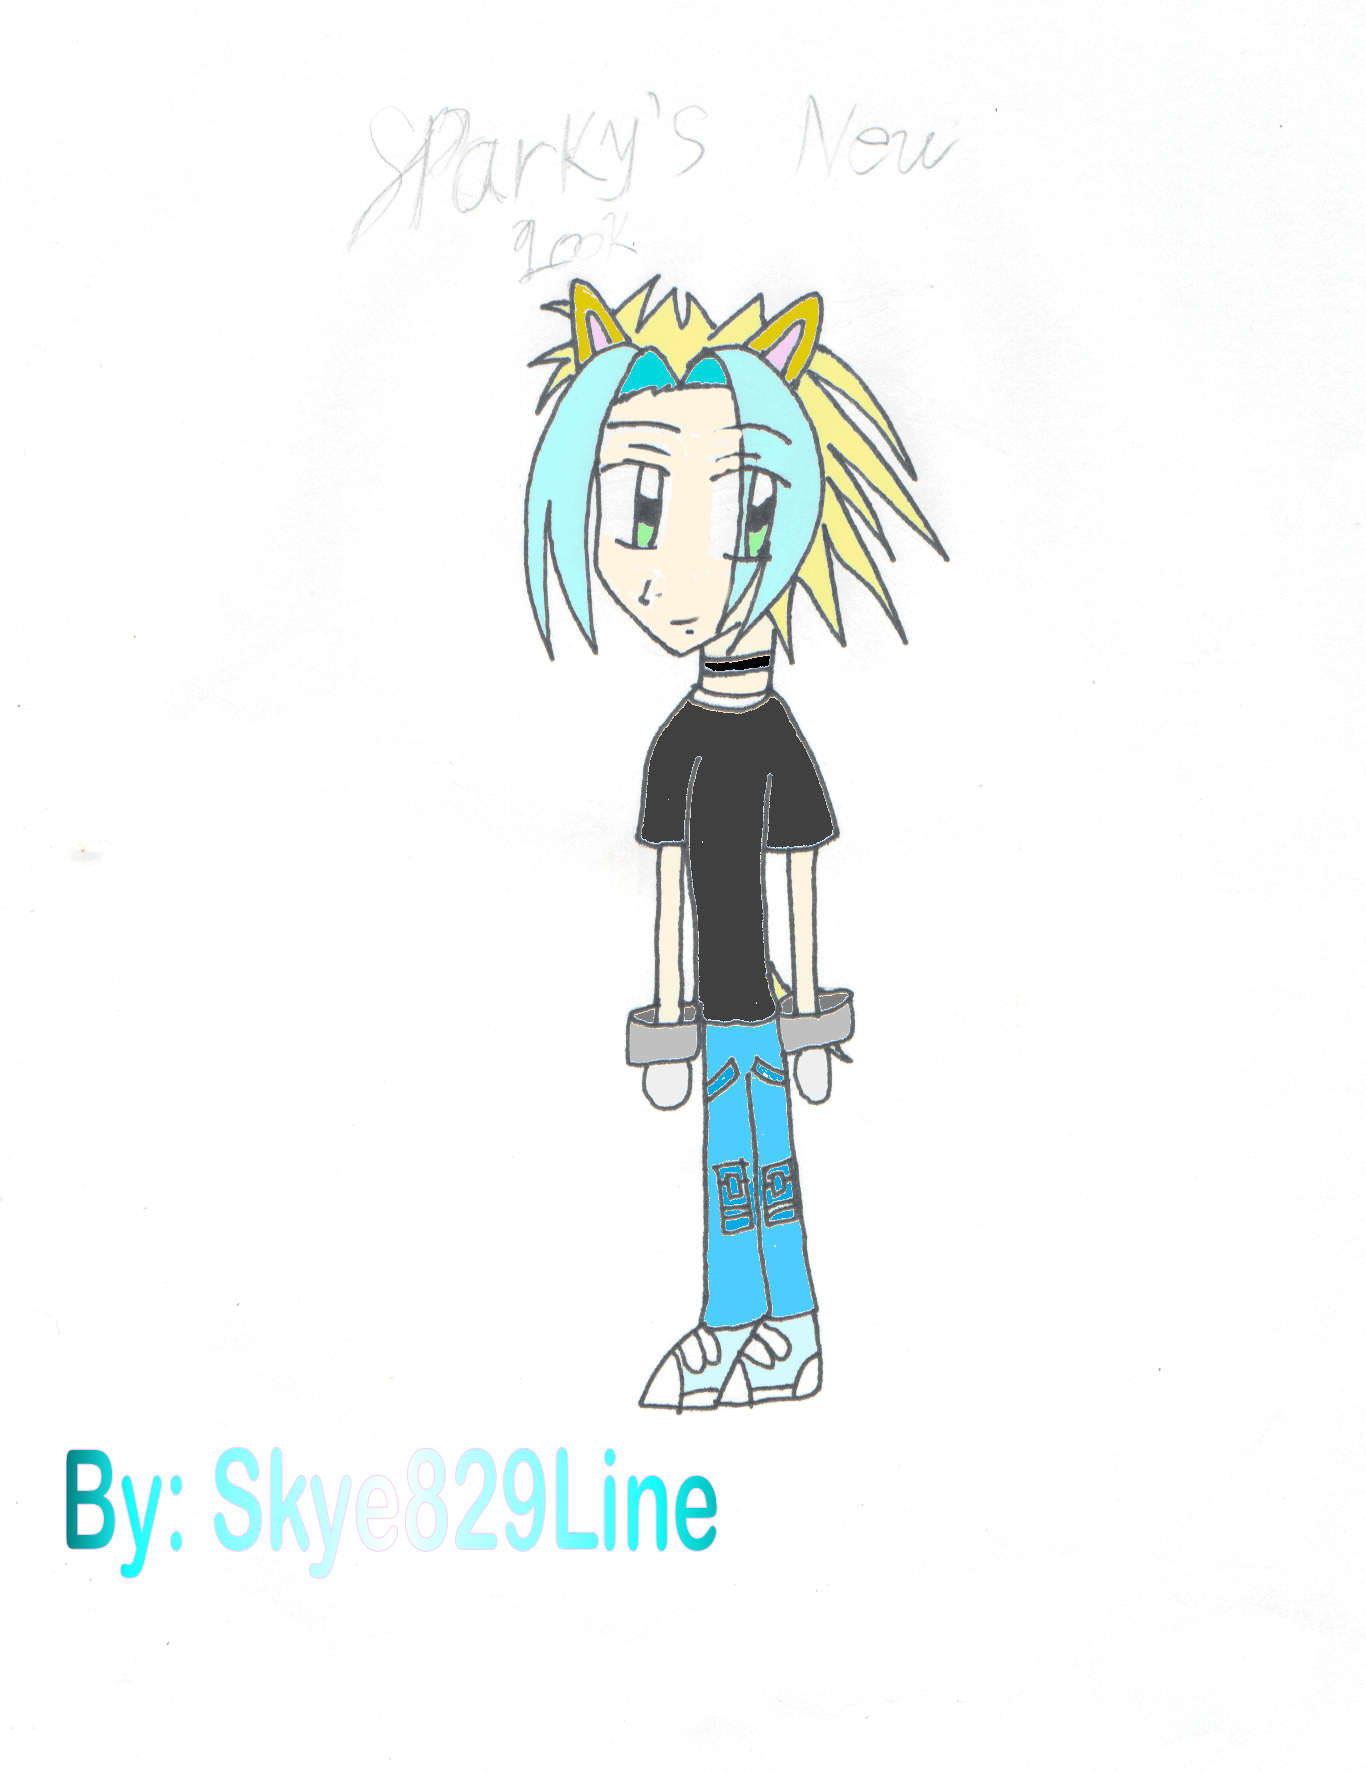 Sparkys New Look!!! by Skye829Line